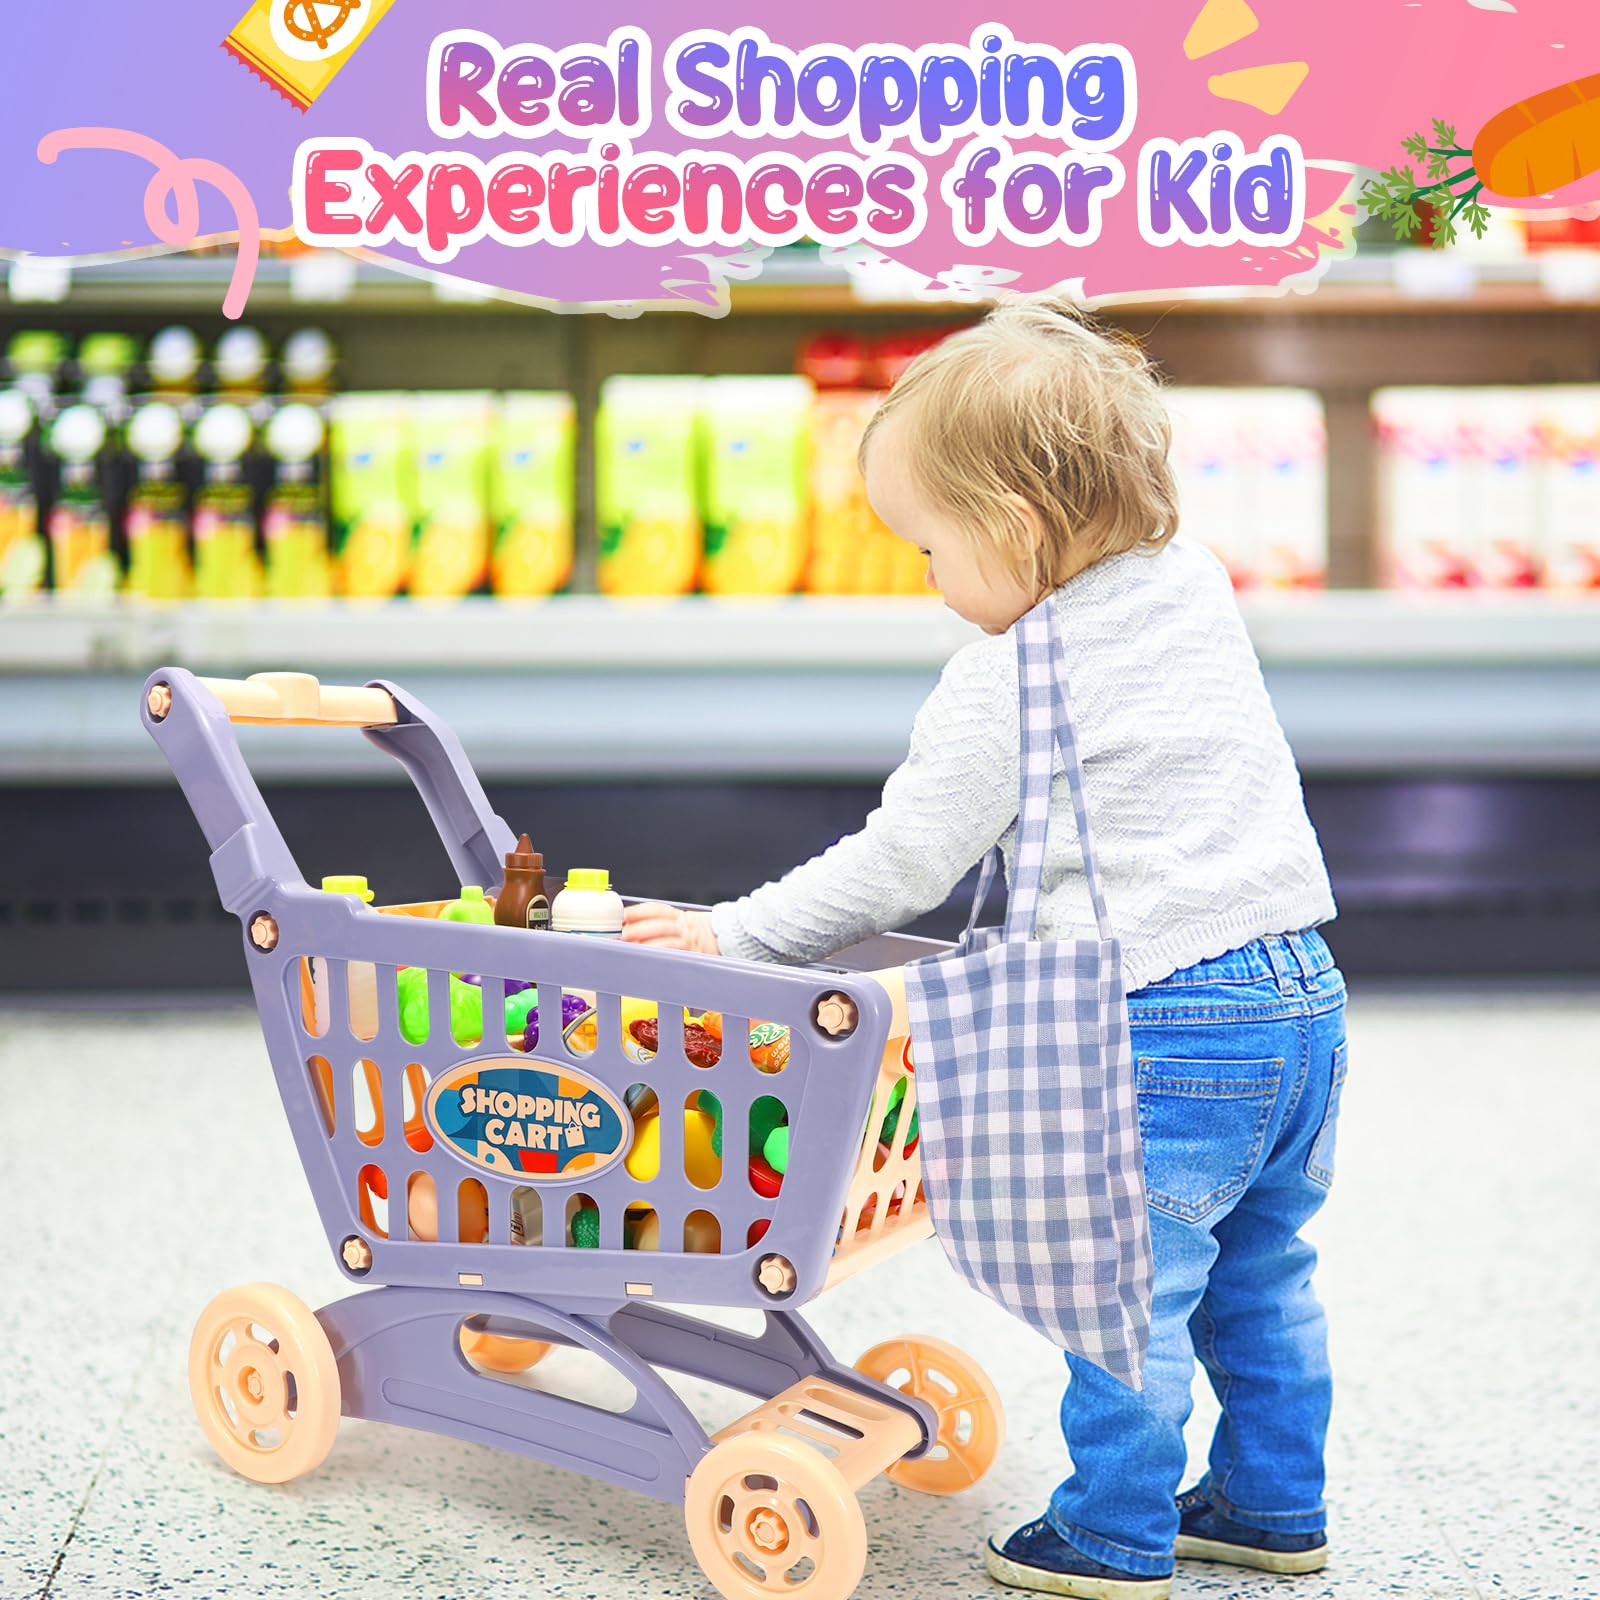 Tagitary Shopping Cart Toy for Kids,82 PCS Toddlers Large Play Grocery Cart with Shopping Bag,Included Pretend Food Veggies,Play Money Cash and Coins,Educational Toys Play Kitchen Accessories for Kids